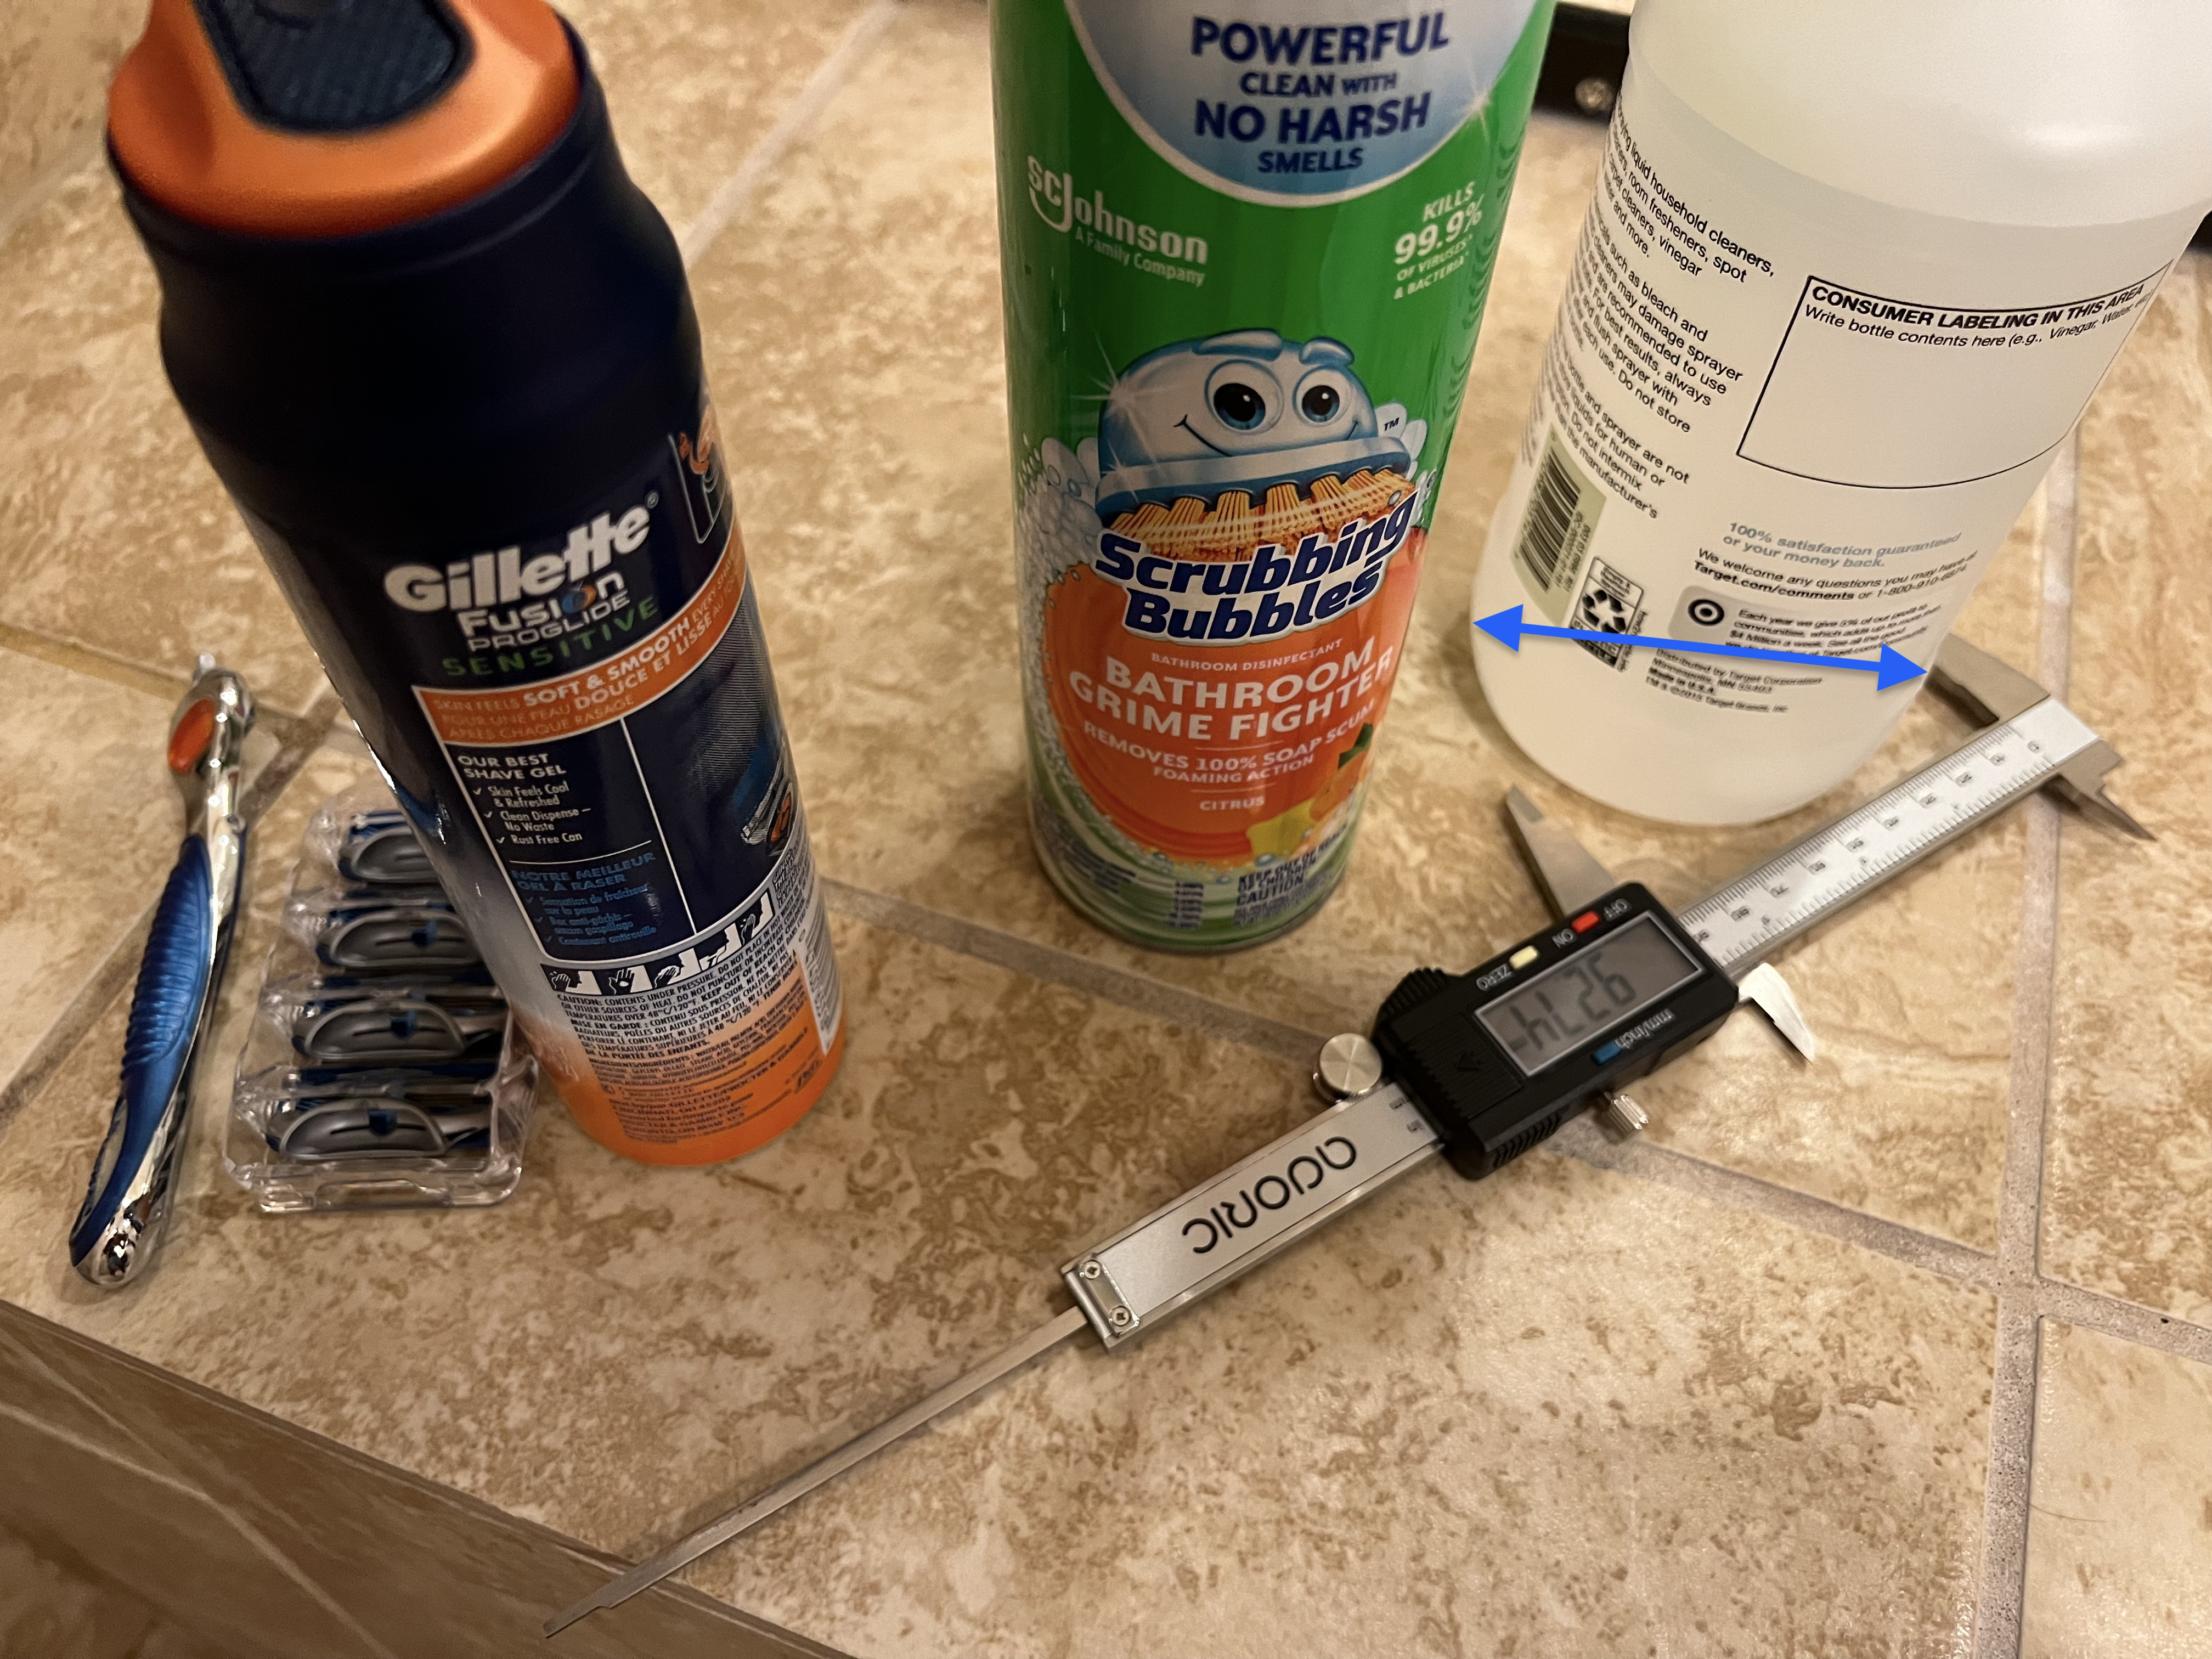 Photograph of measurements of shower accessories with cylindrical forms including spray bottle foaming cleaner and shaving accessories